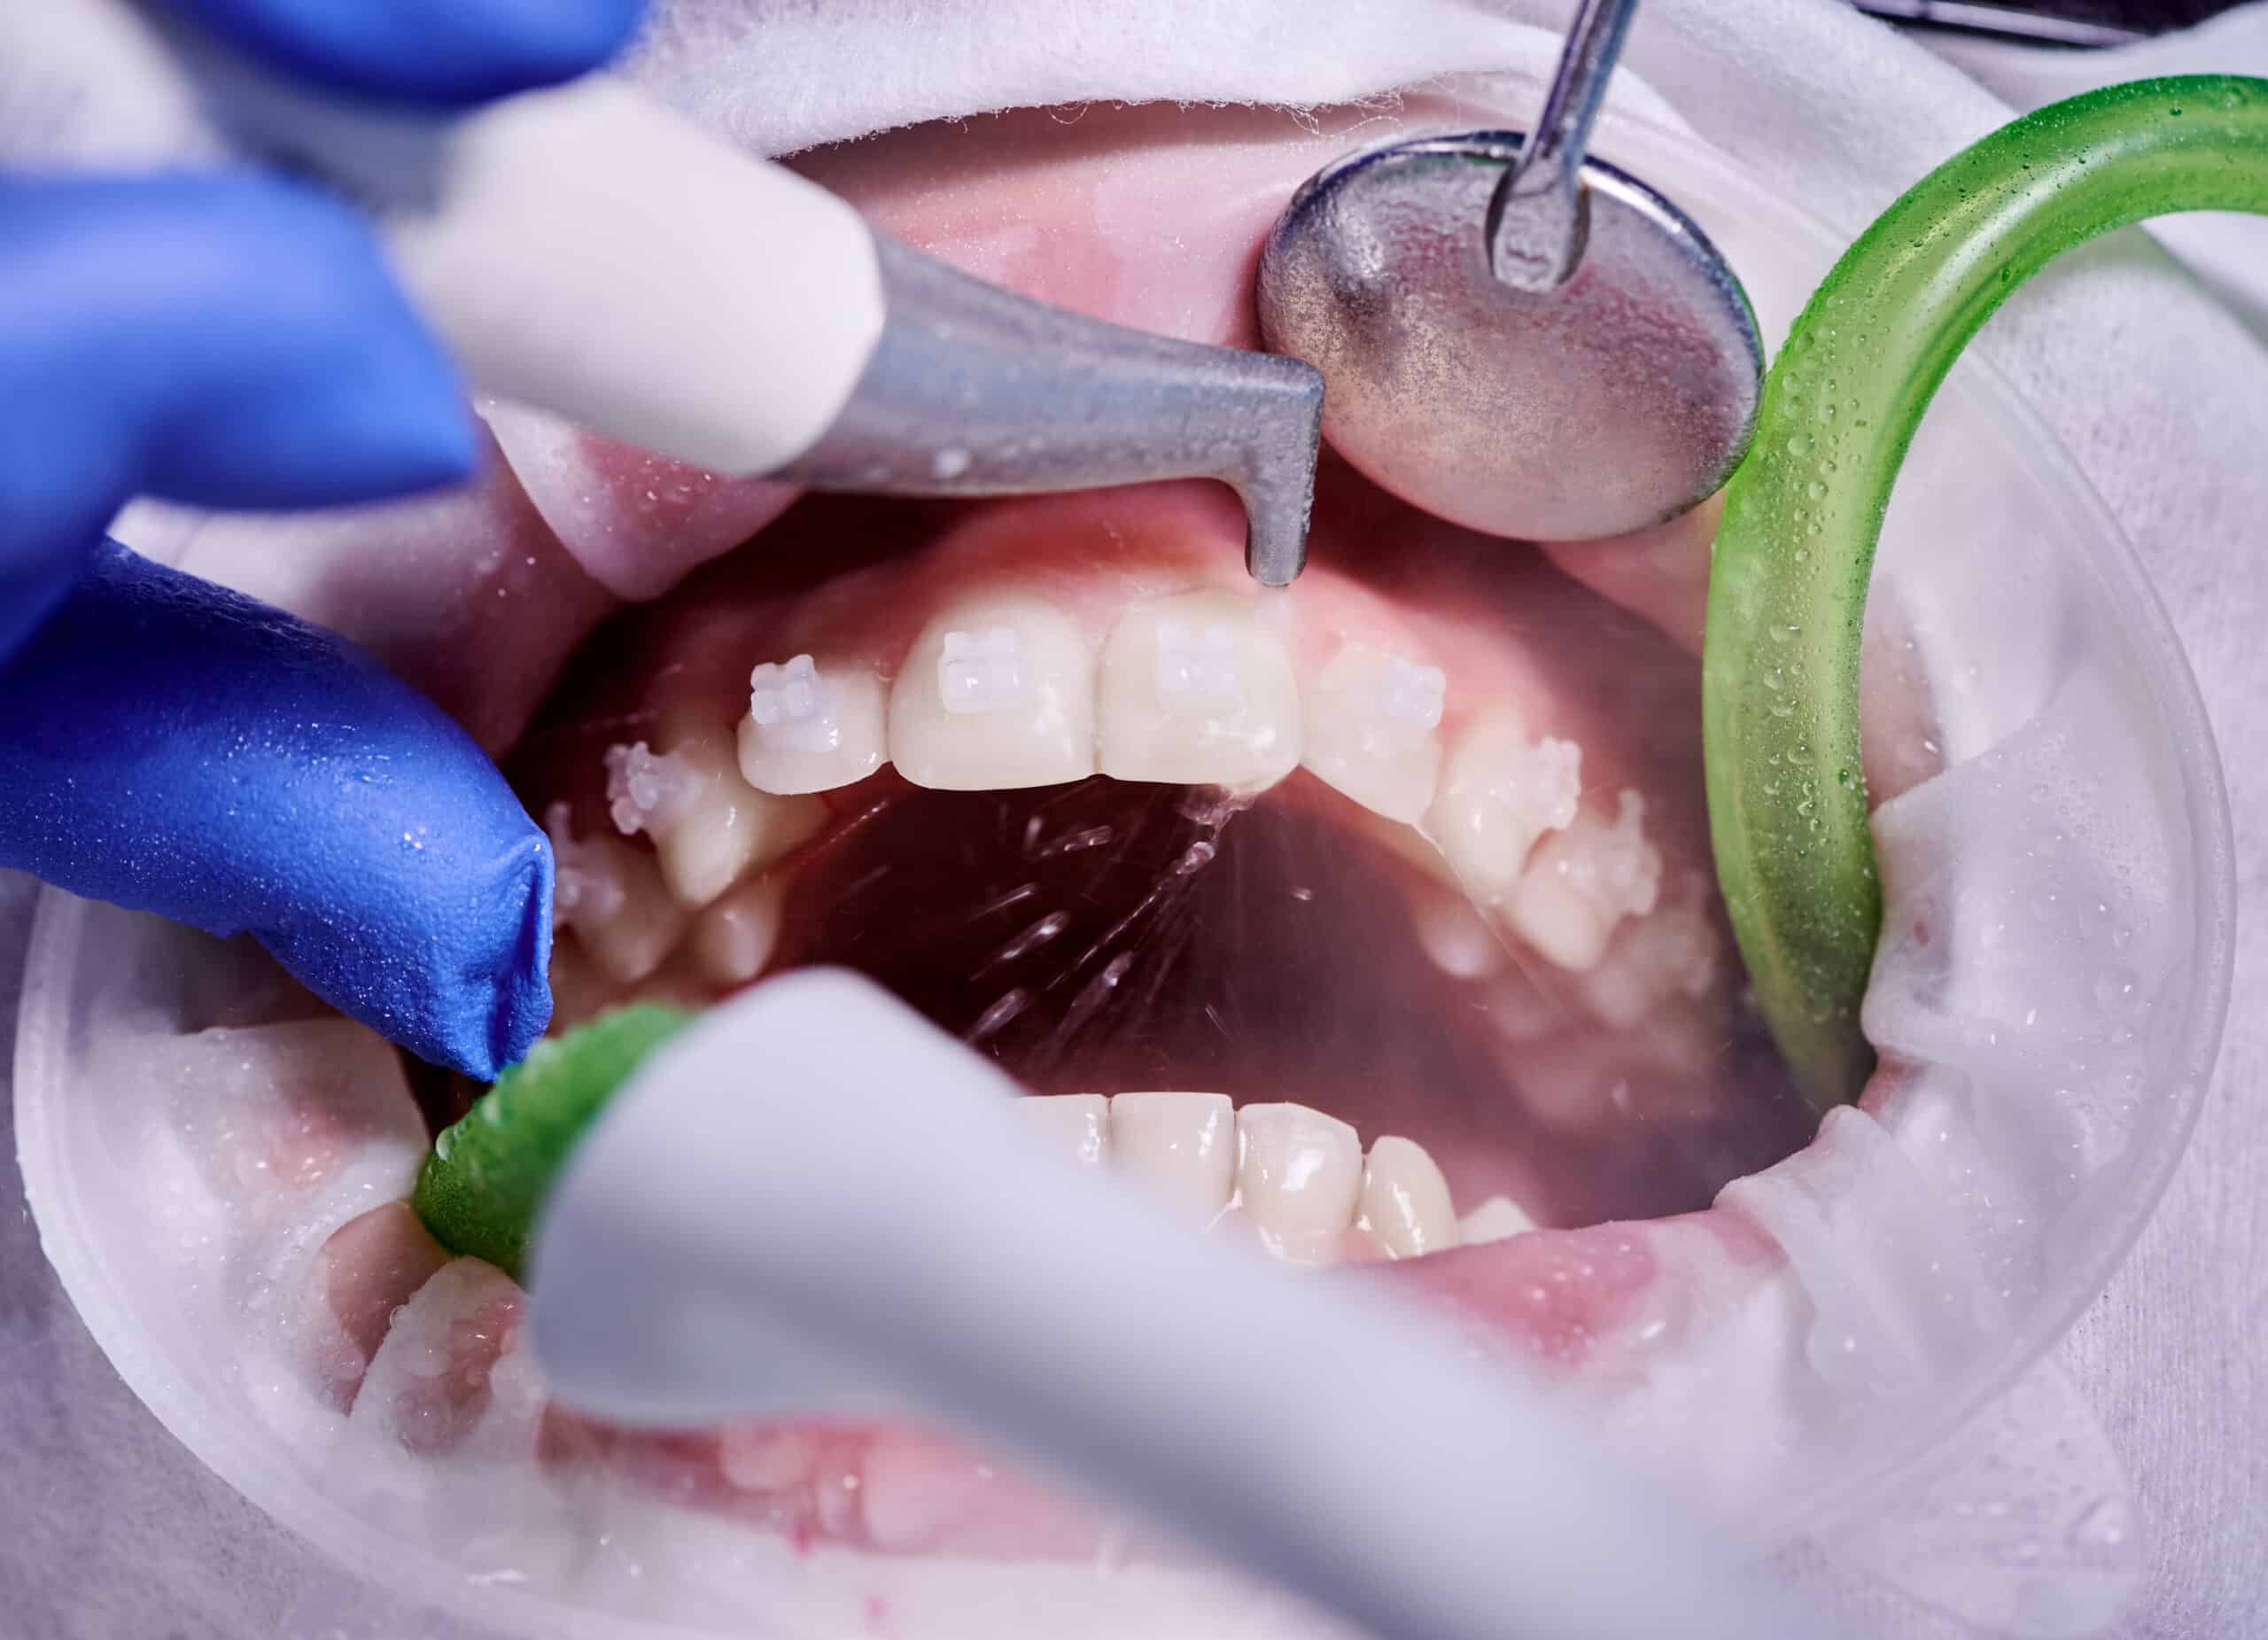  Cleaning process in patient's mouth with cheek retractor and brackets on teeth